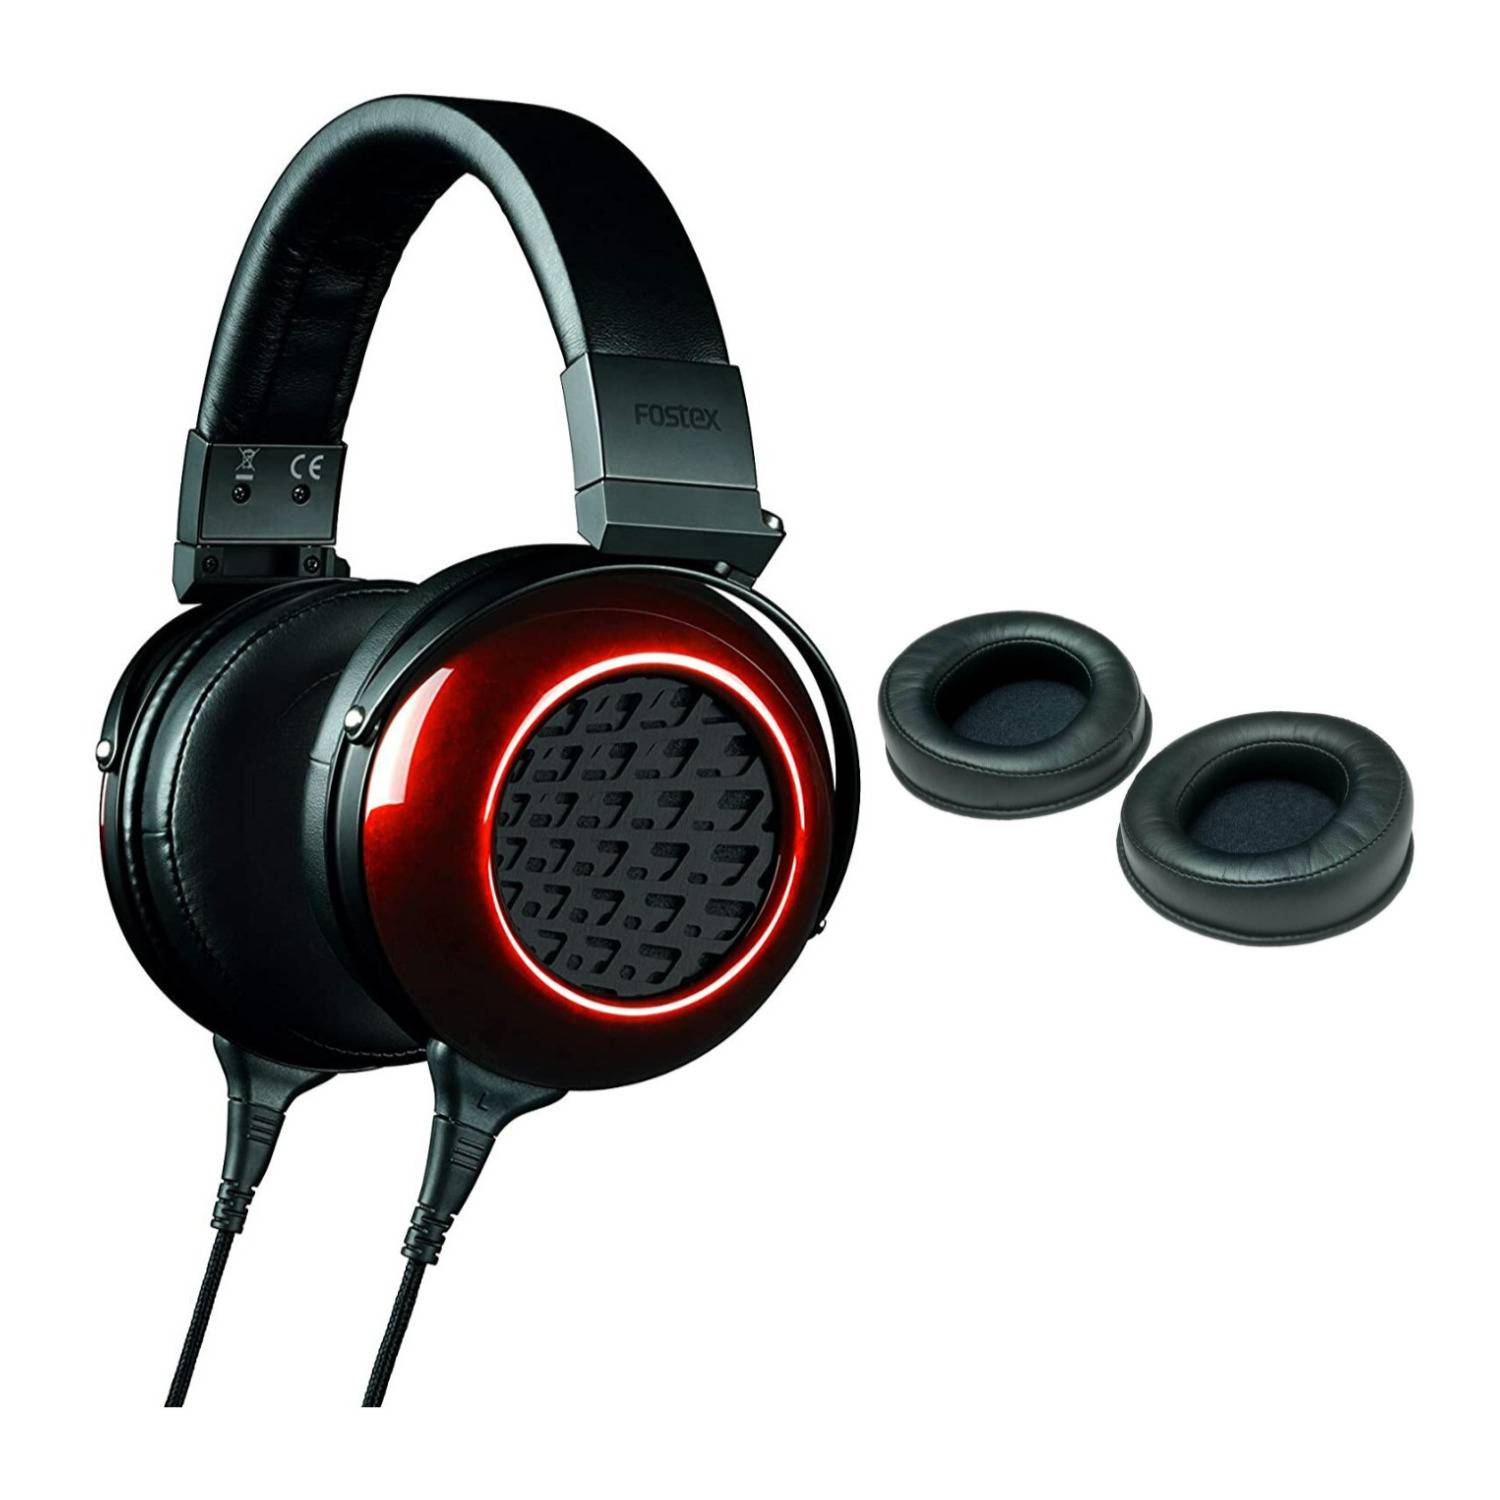 Fostex TH-909 Premium Open-Back Stereo Headphones with EX-EP-99 Replacement Ear Pads